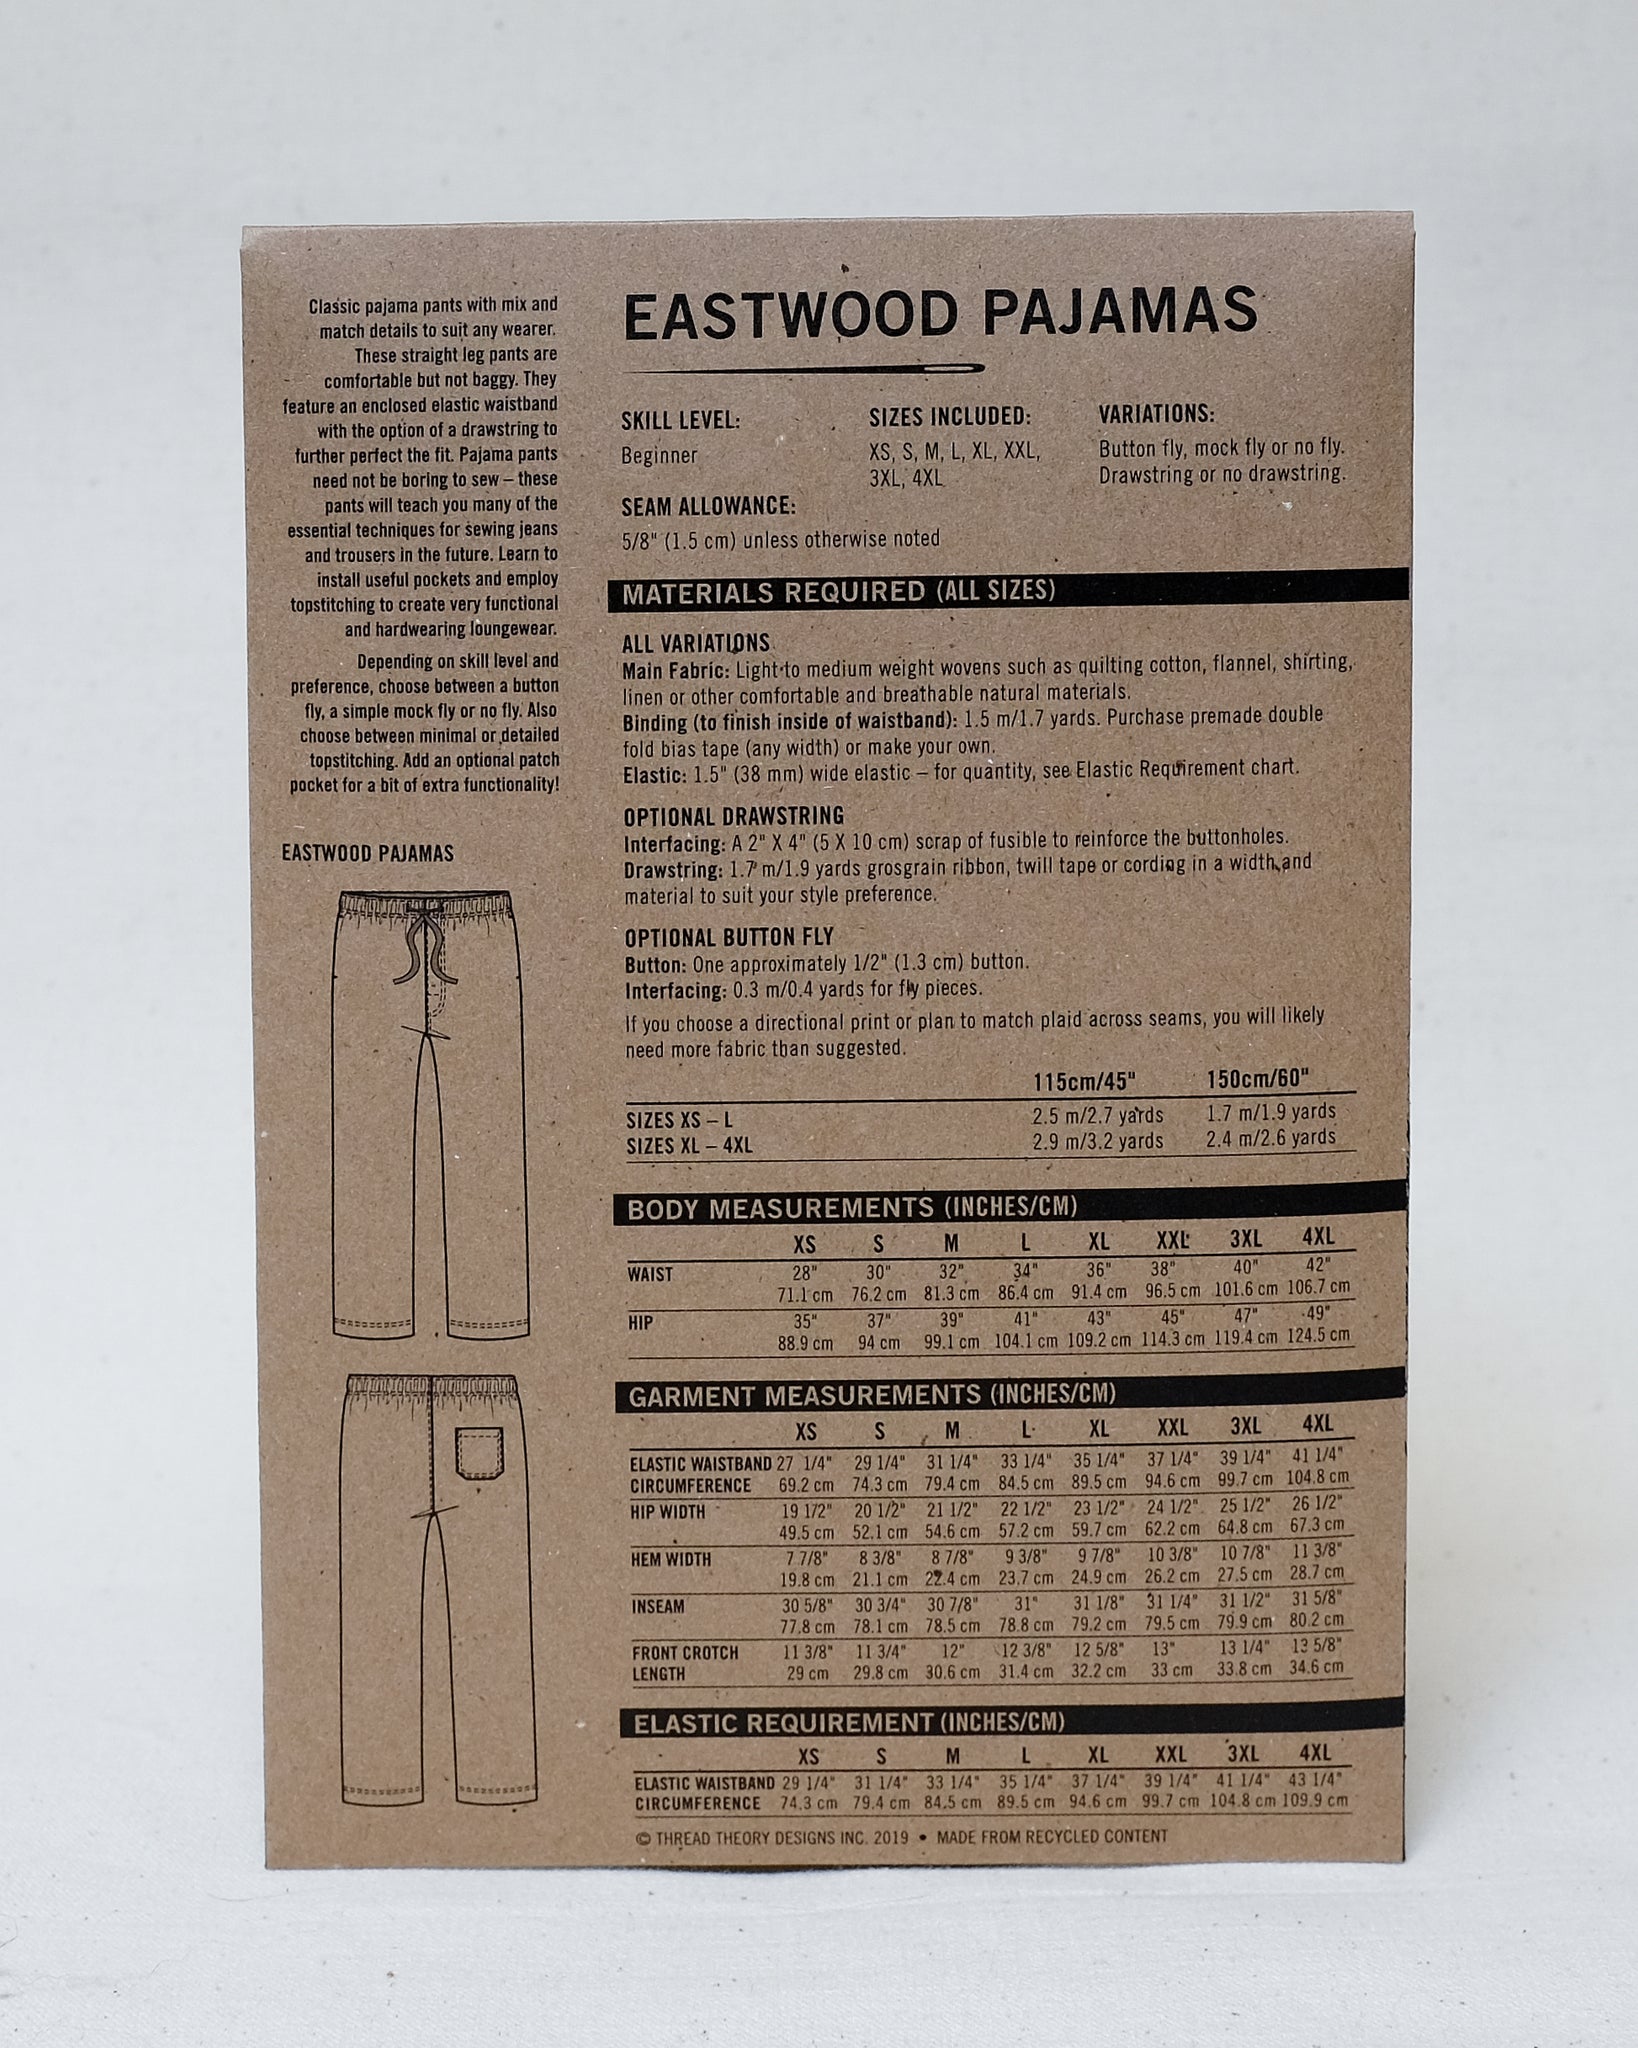 Thread Theory - 13 Eastwood Pajamas, Sewing Pattern